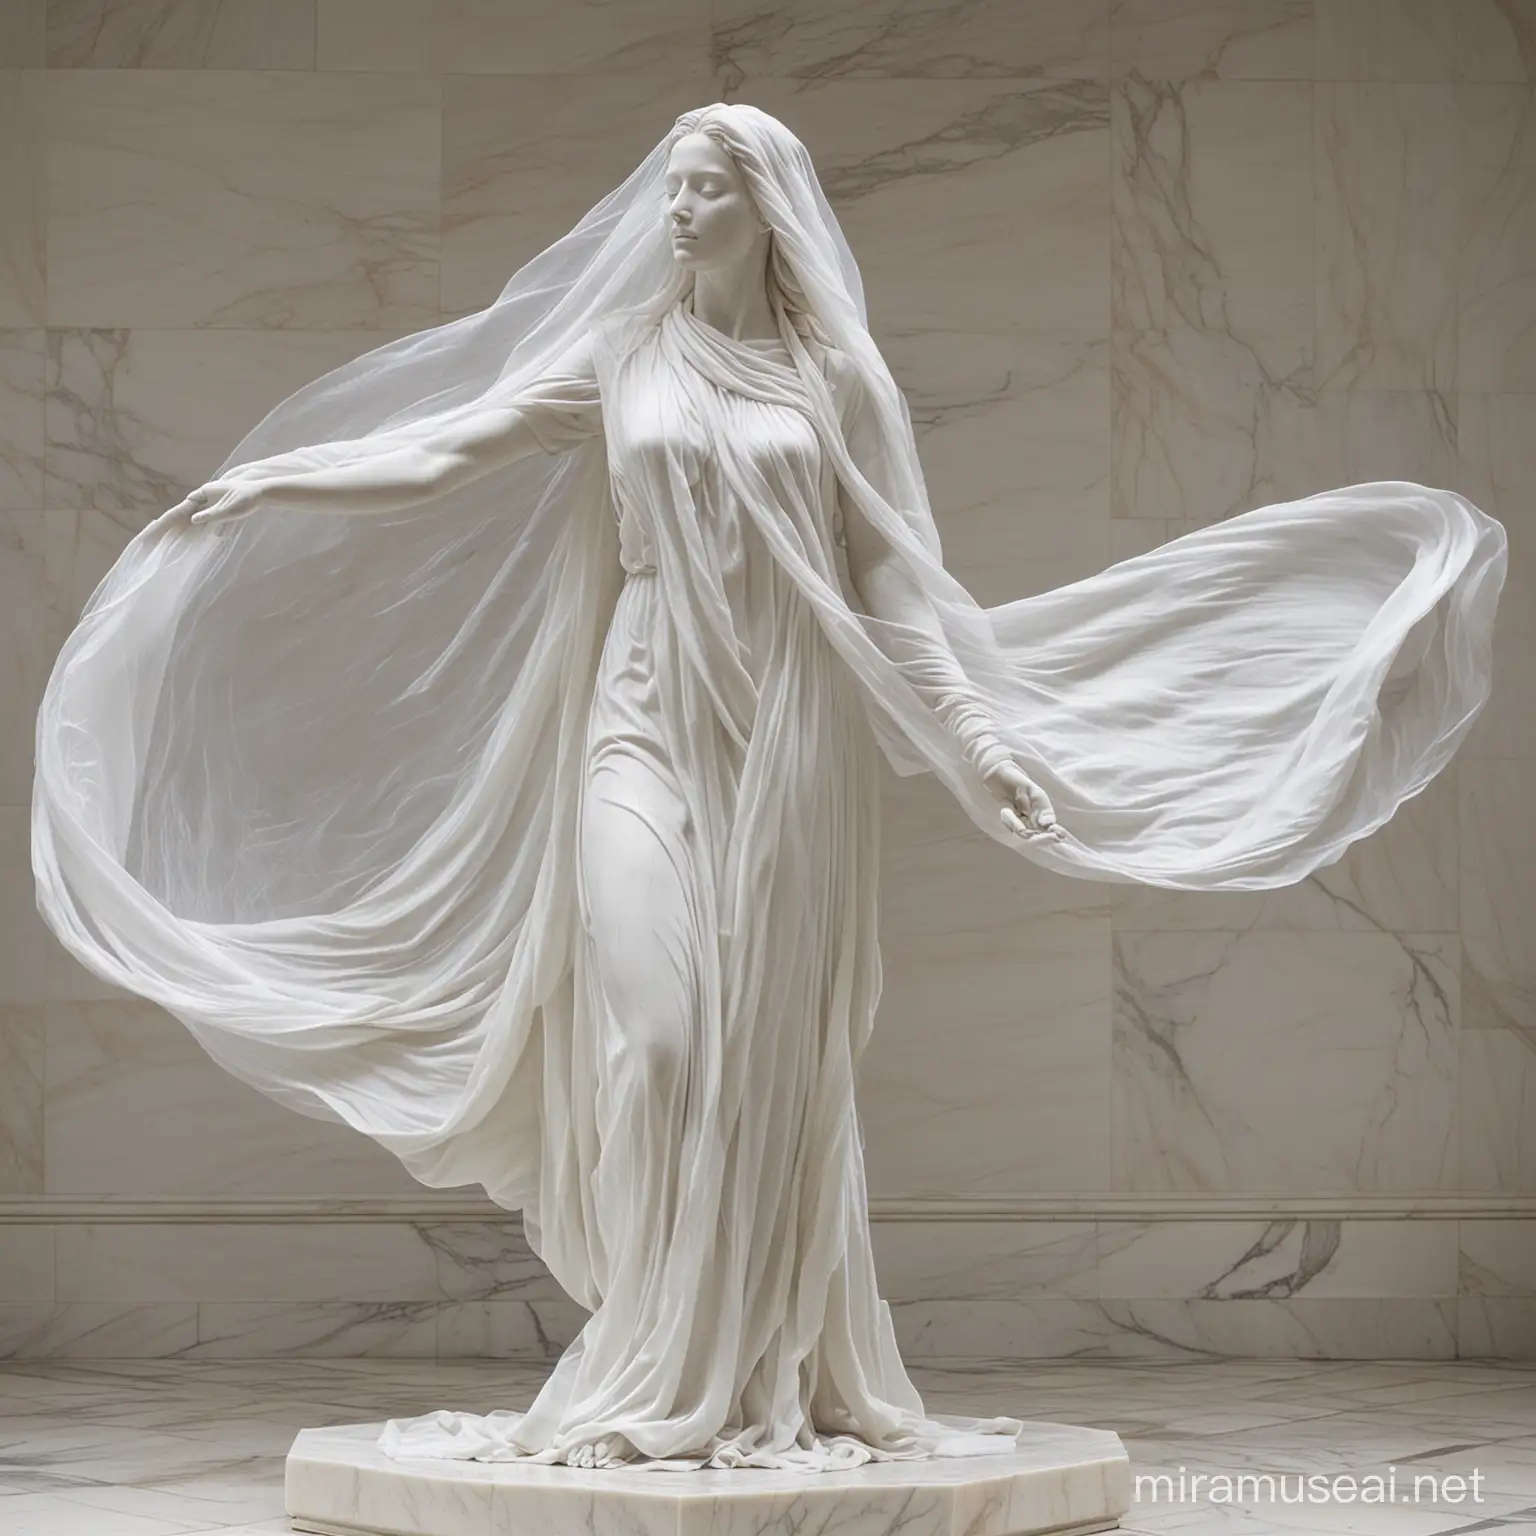 Graceful Woman in Flowing White Veil Sculpture